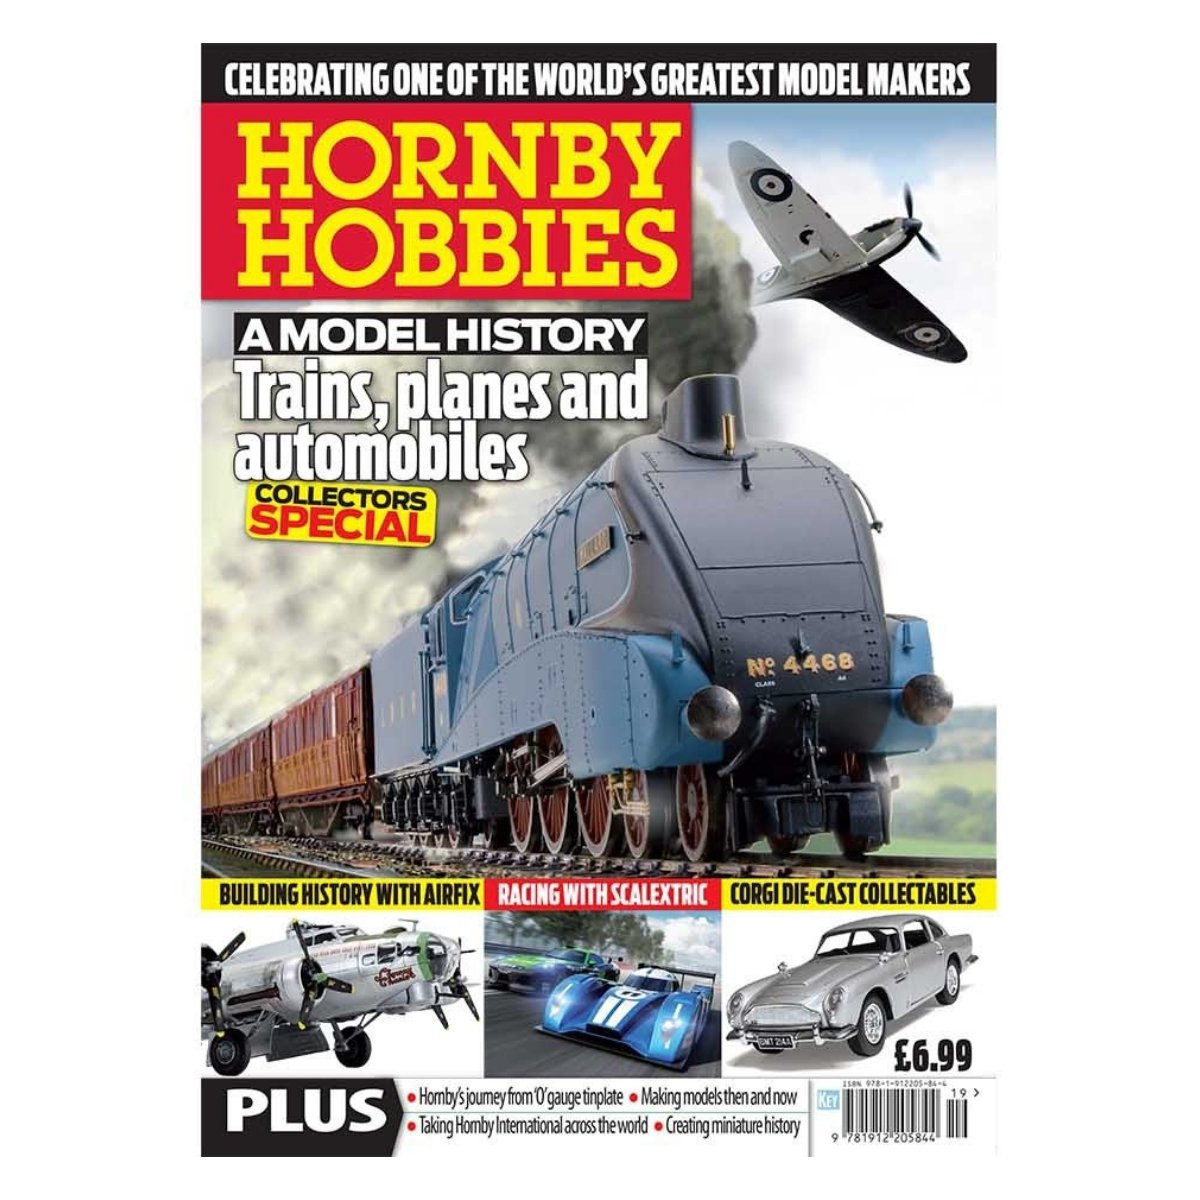 Hornby Hobbies - A Model History (140 Page Bookazine)